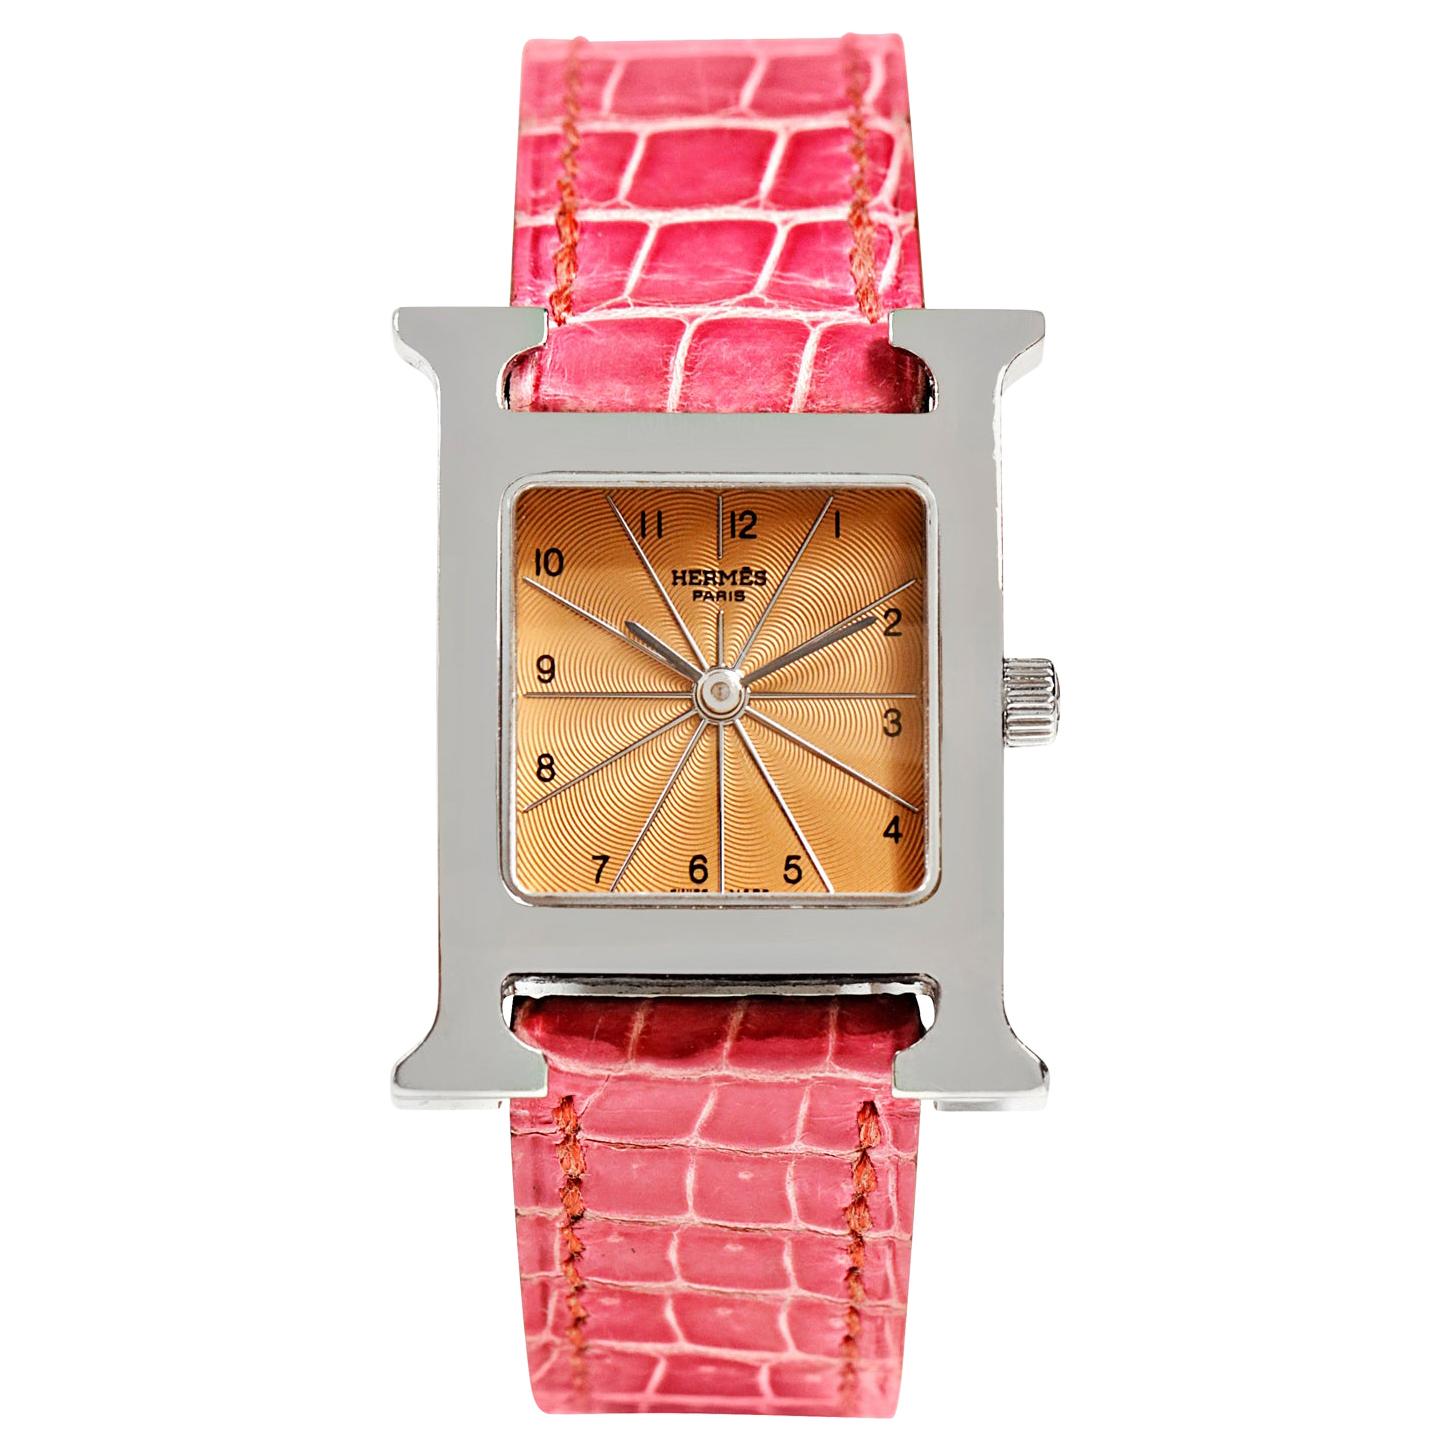 Hermès Stainless Steel Heure H Watch with Pink Croc Band